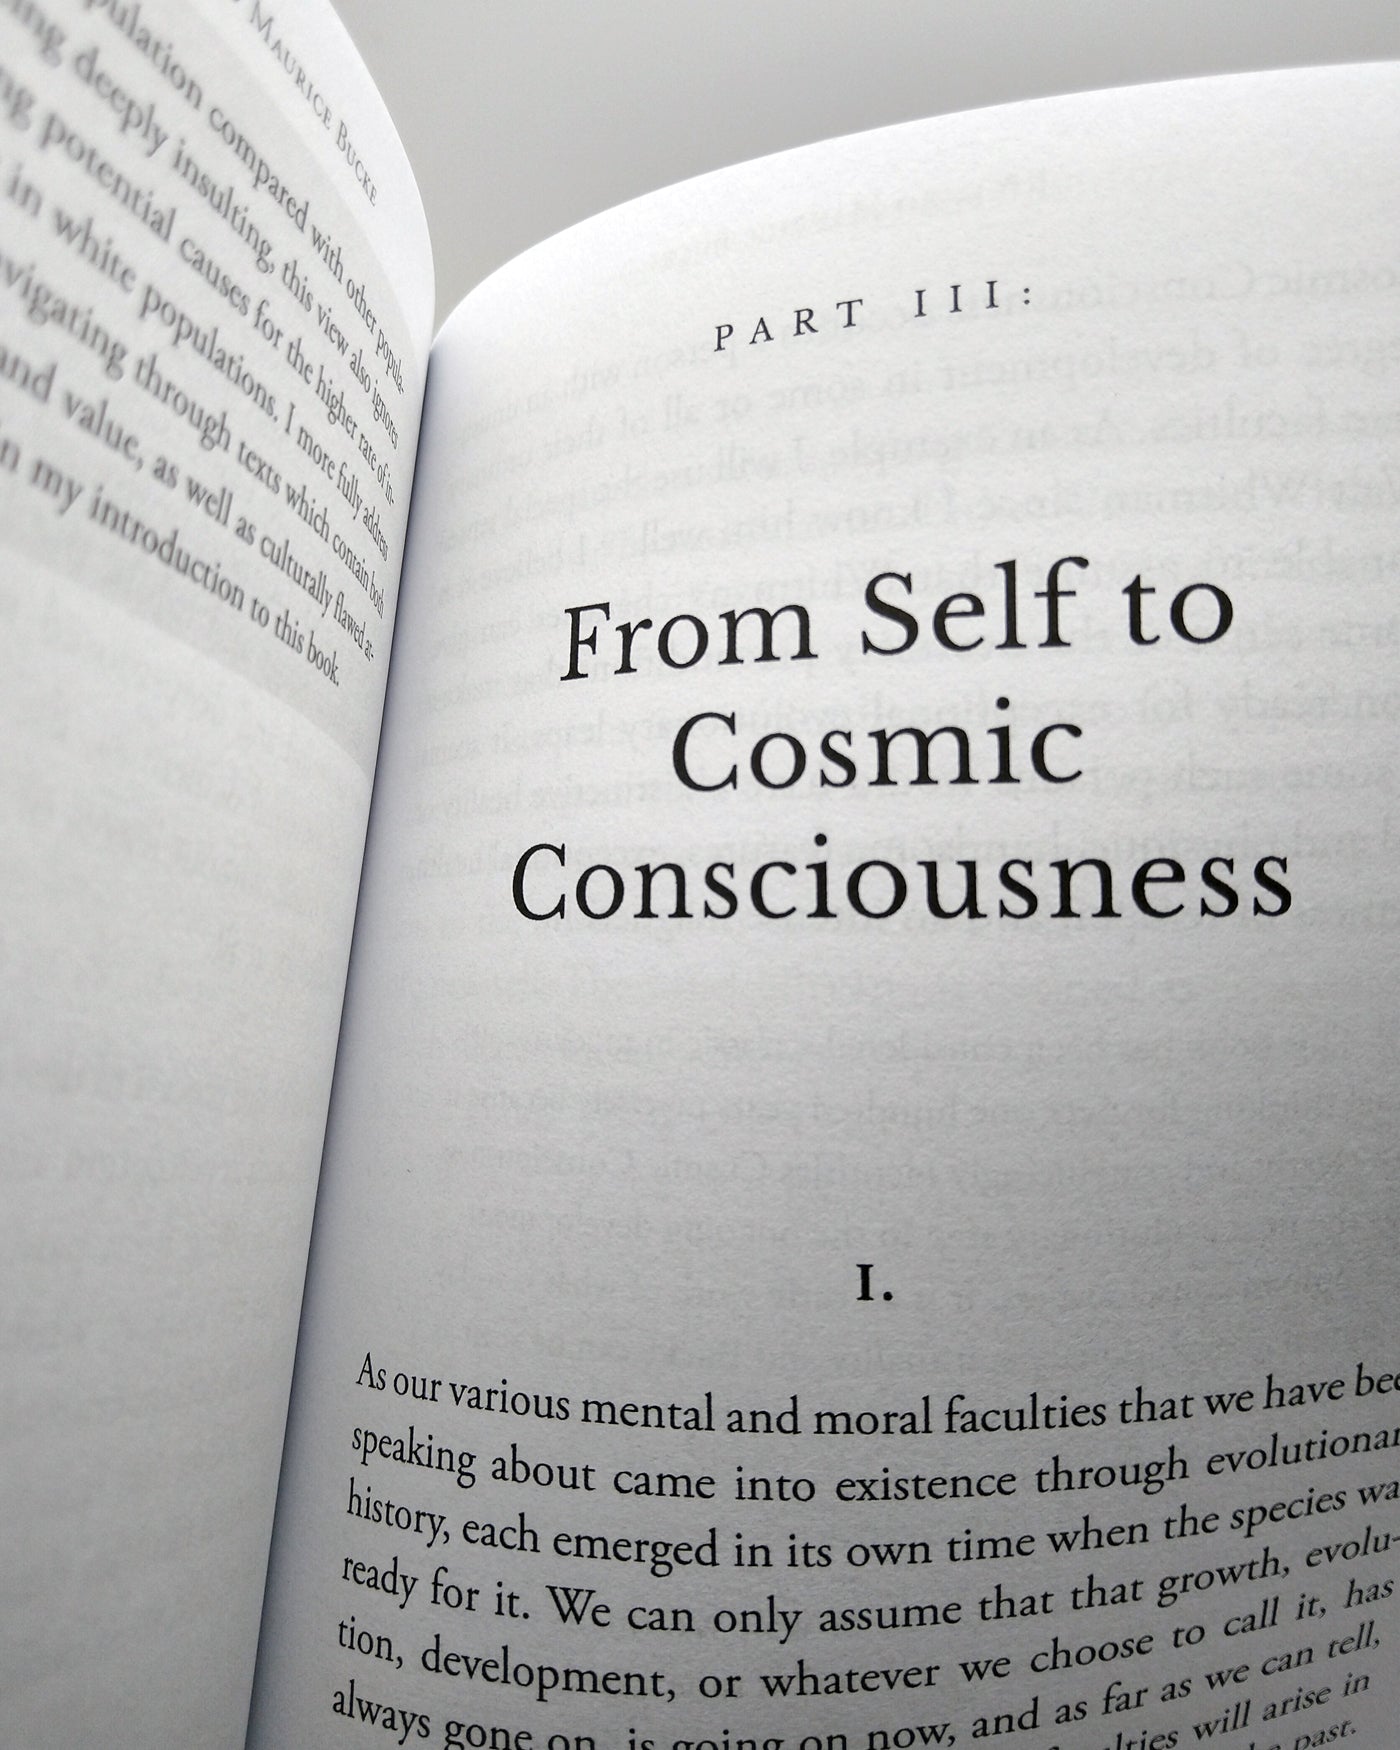 Cosmic Consciousness (Annotated): A Study in the Evolution of the Human Mind